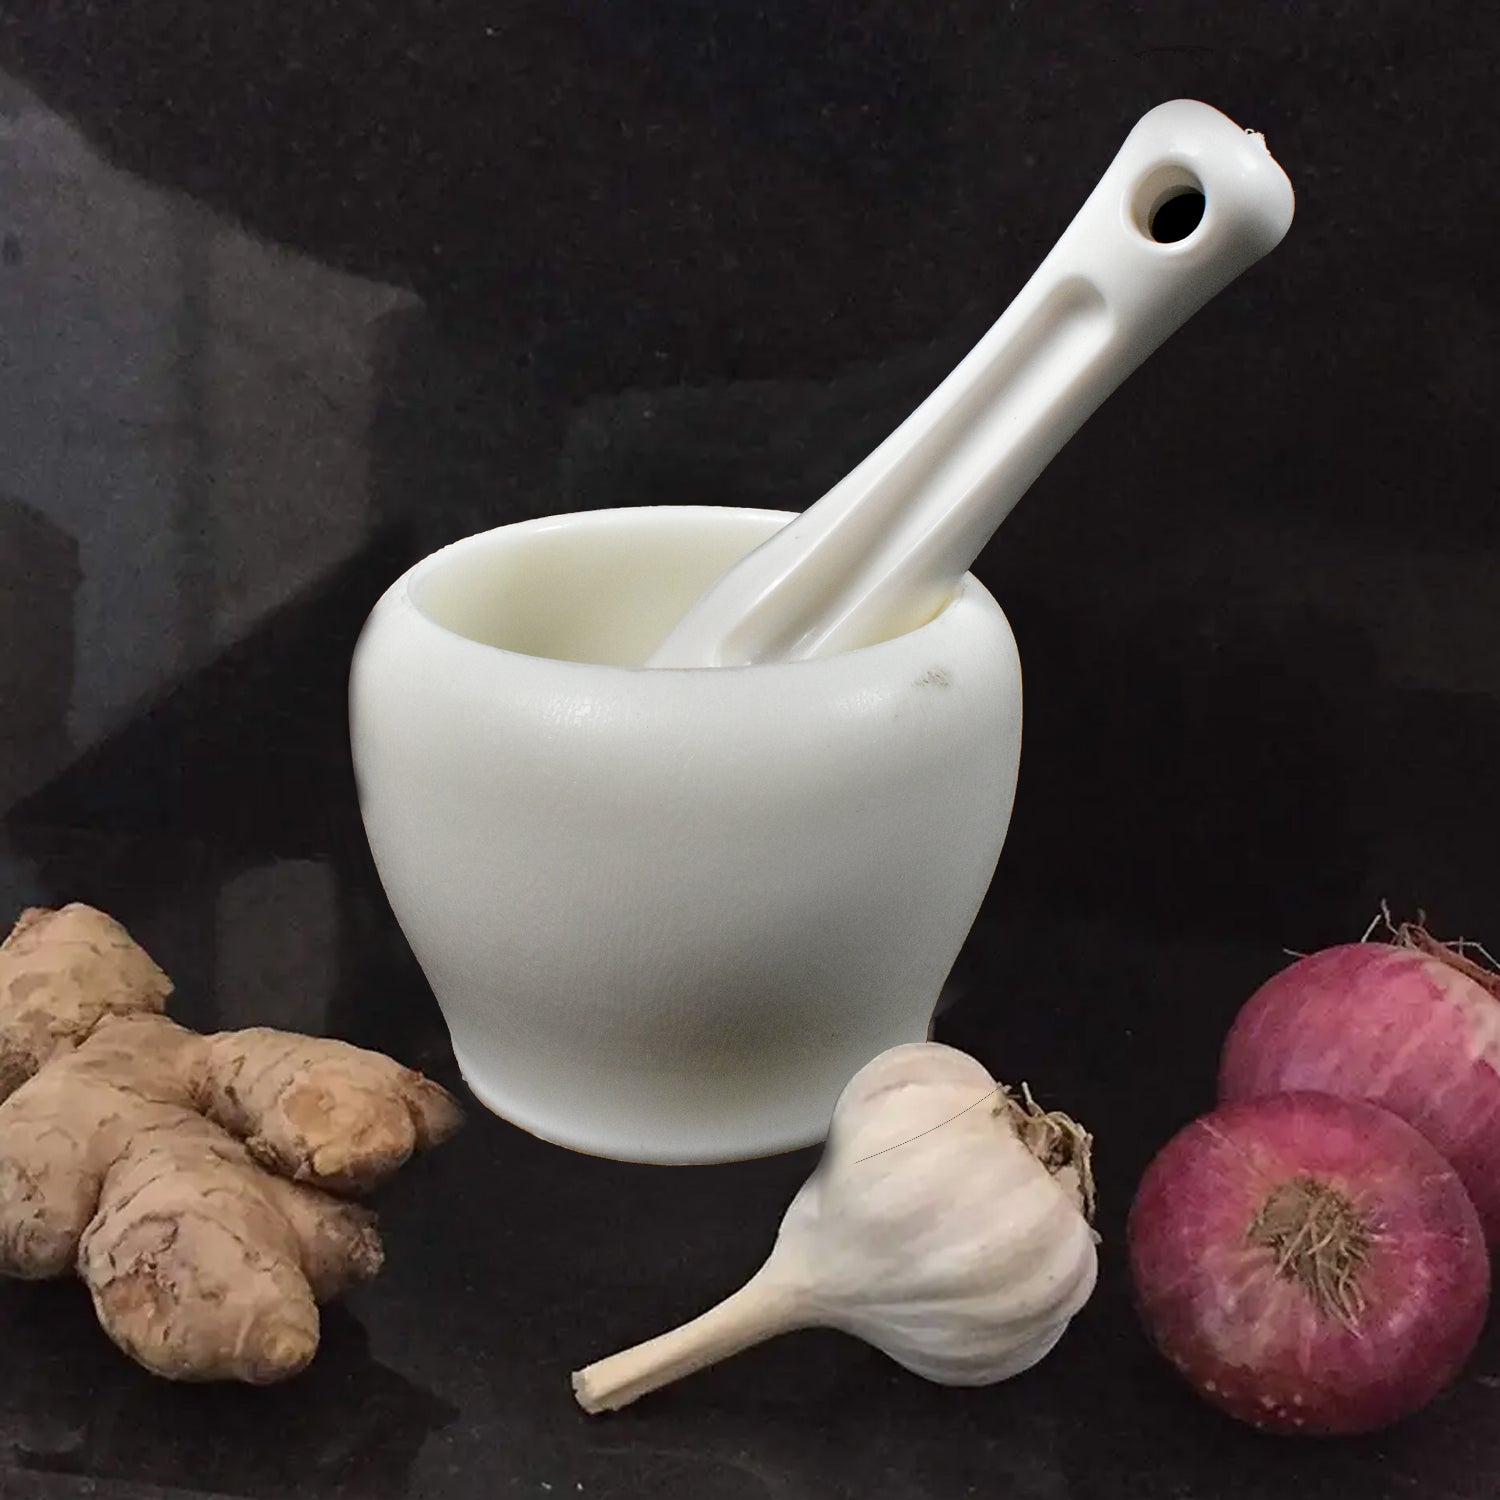 7193  Mortar and Pestle Set for Spices, Okhli Masher, Khalbatta, Kharal, Mixer, Natural & Traditional Grinder and Musal, Well Design for Kitchen, Home, Herb DeoDap